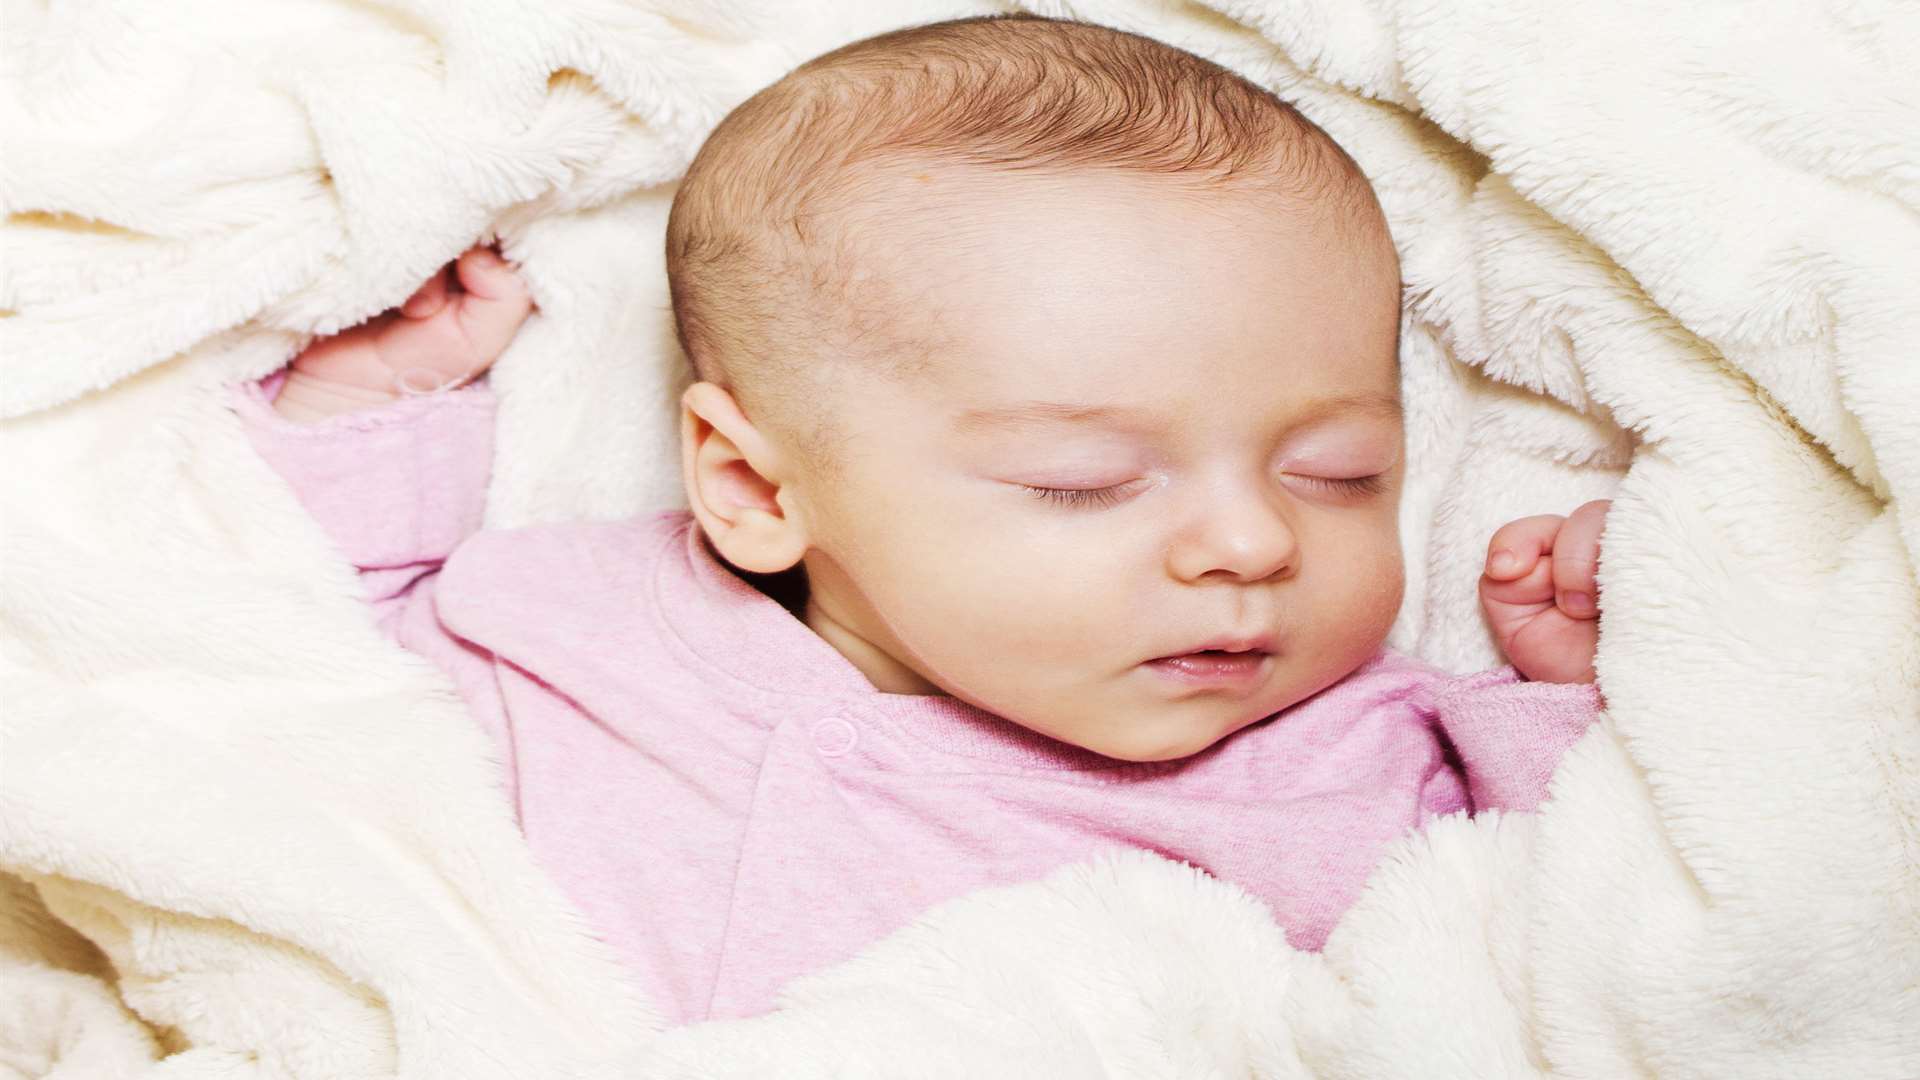 The amount of sleep new parents get depends on the baby